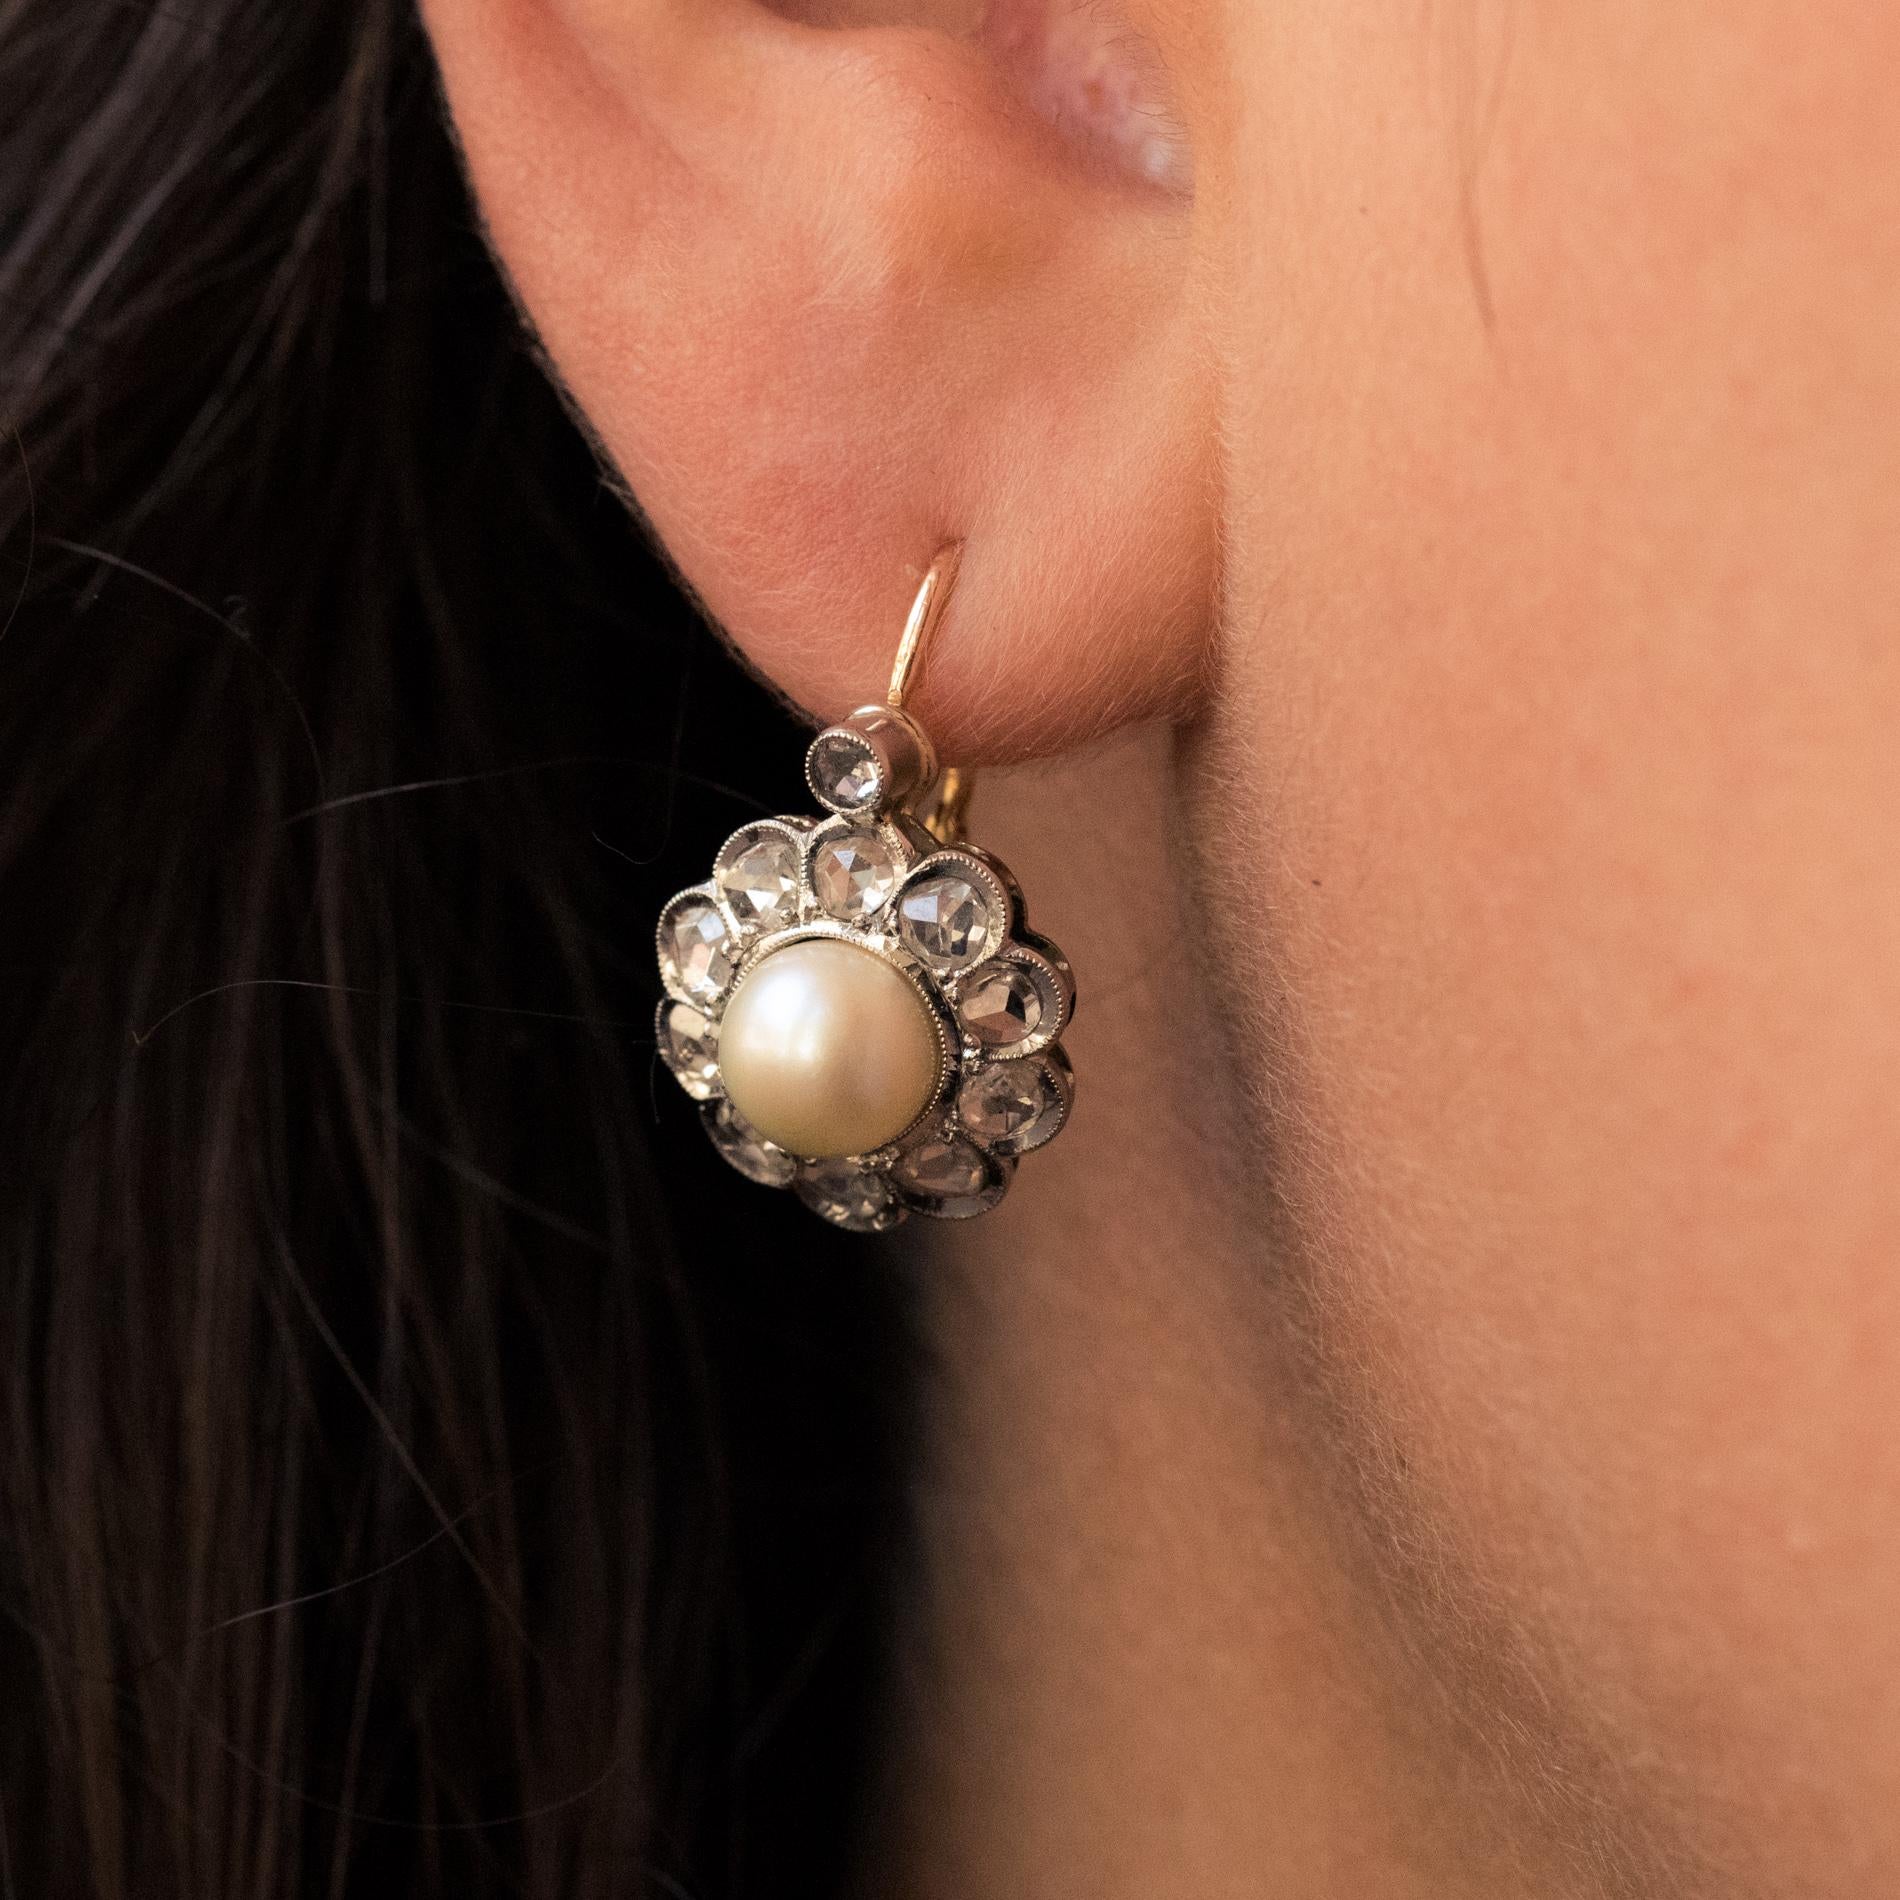 Earrings in 18 karat yellow gold, eagle's head hallmark and platinum.
Sublime antique lever- back earrings, each one represents a daisy whose heart is a pearly white round cultured pearl, and the petals are rose- cut diamonds. The all is surmounted